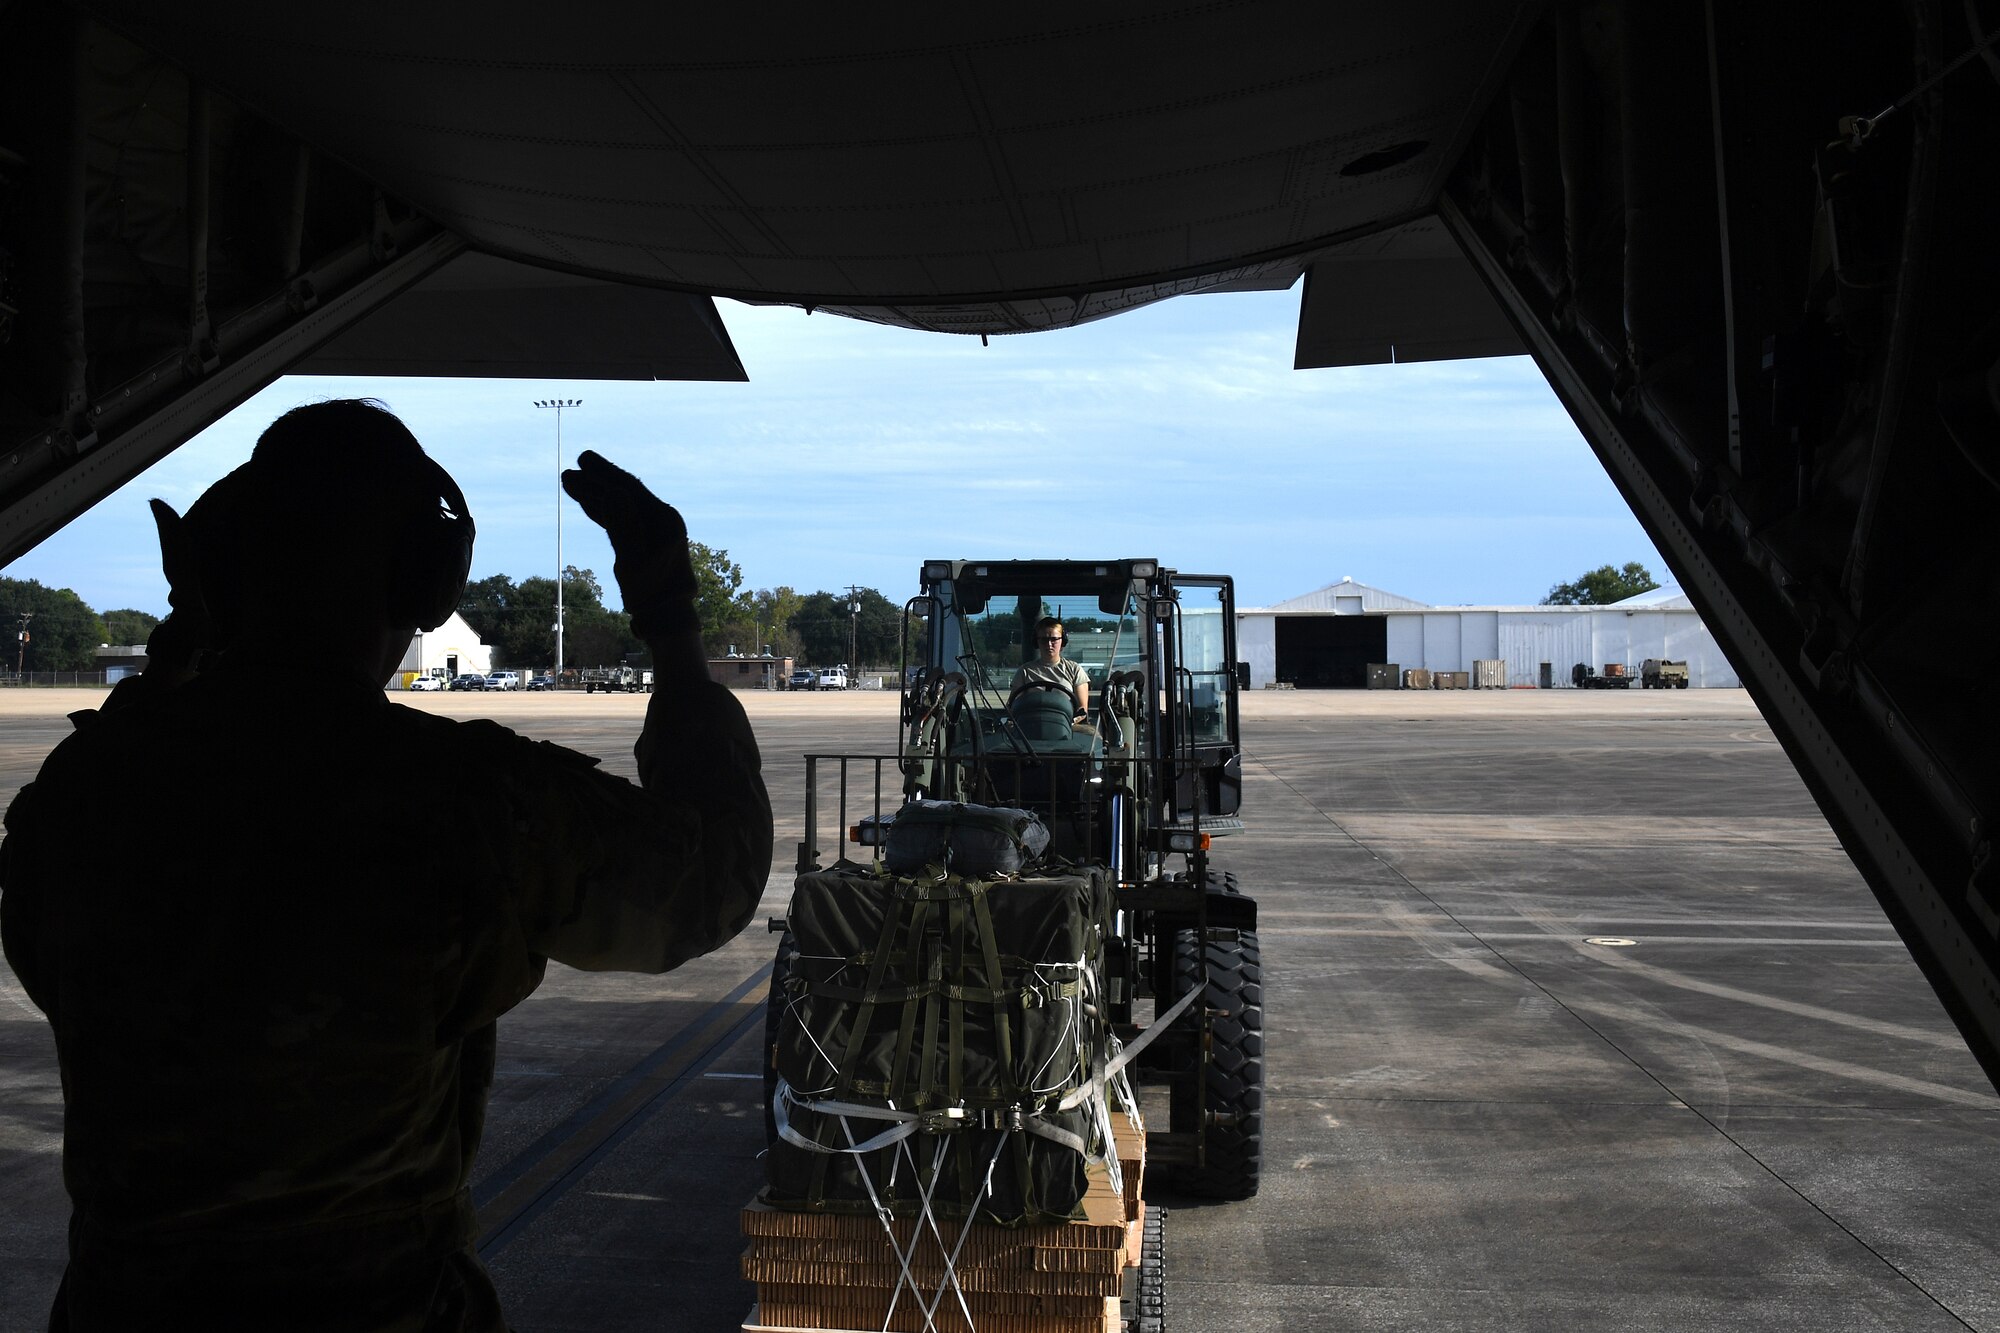 U.S. Air Force Airman 1st Class Elizaveta Woodcock, 321st Contingency Response Squadron aerial porter, moves cargo onto a U.S Air Force C-130 aircraft during exercise Green Flag Little Rock, Oct. 24, 2019, Alexandria International Airport, Louisiana. During the exercise the team loaded and downloaded tactical vehicles, airdrop bundles, along with a variety of other pallets to support the Army. (U.S. Air Force photo by Tech. Sgt. Liliana Moreno)